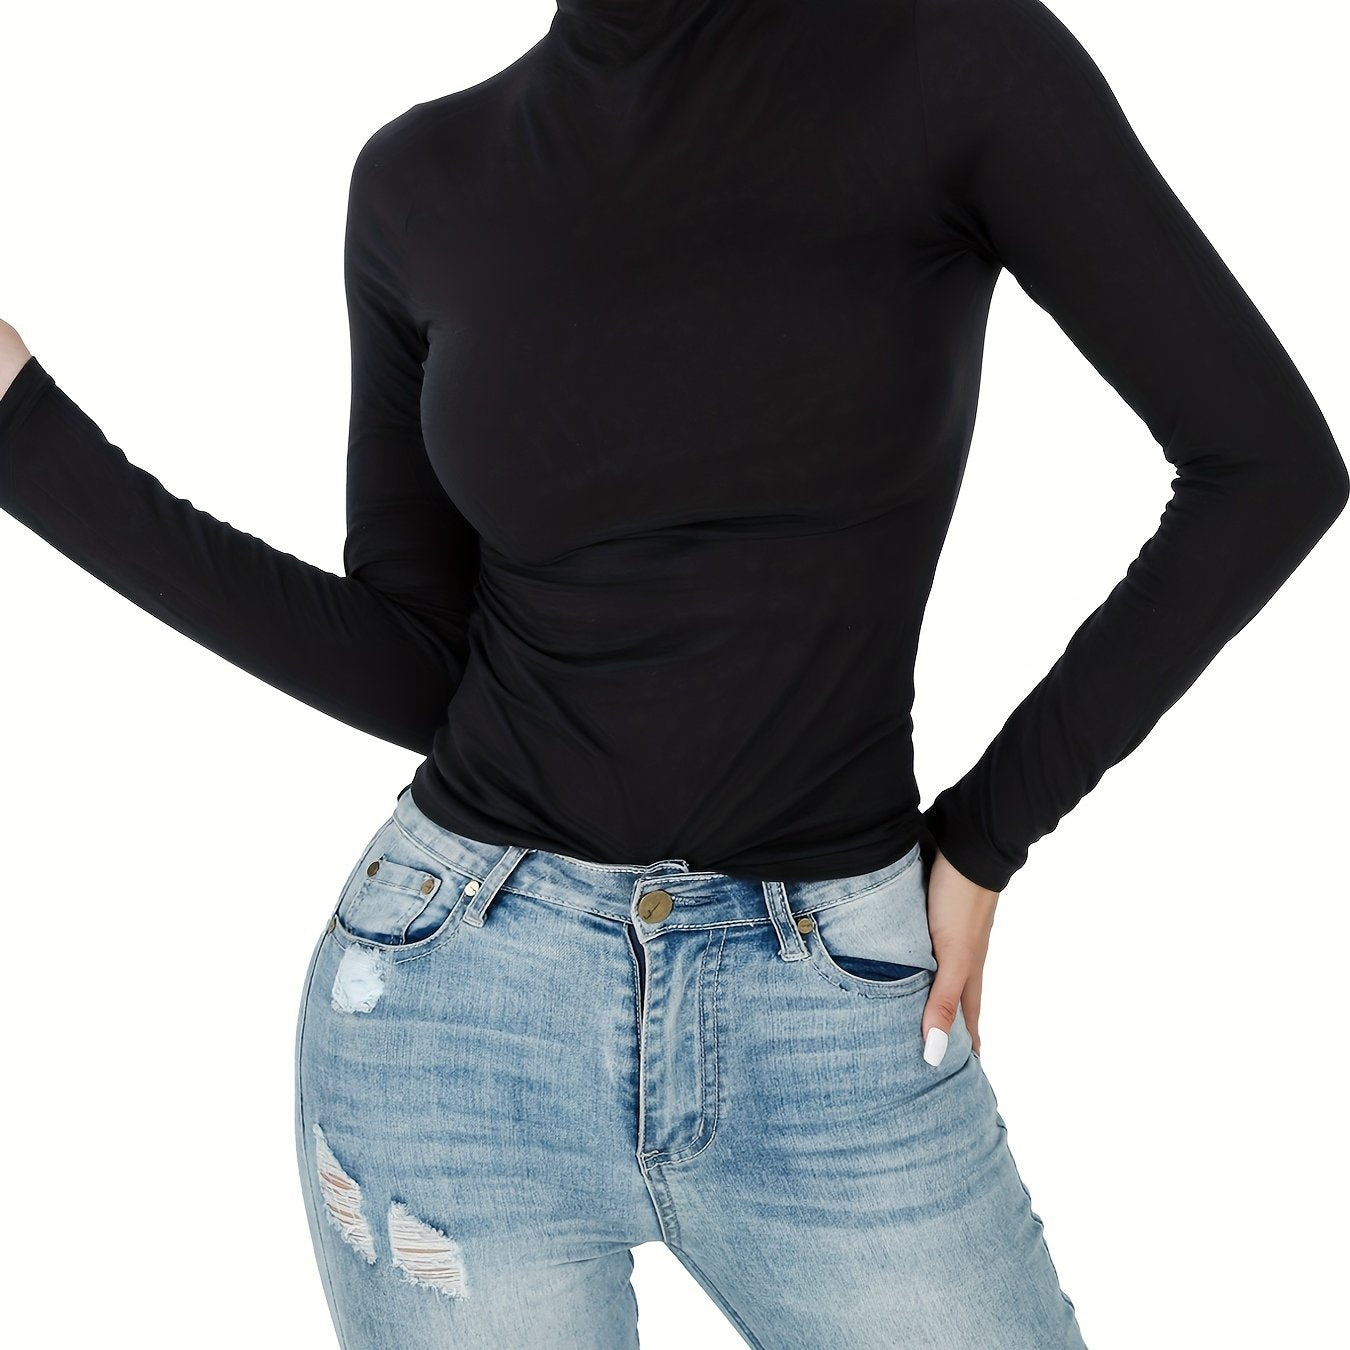 Antmvs Women's Casual High Neck Long Sleeve T-Shirts, Solid Color Turtleneck Basic T Shirt, Women's Tops